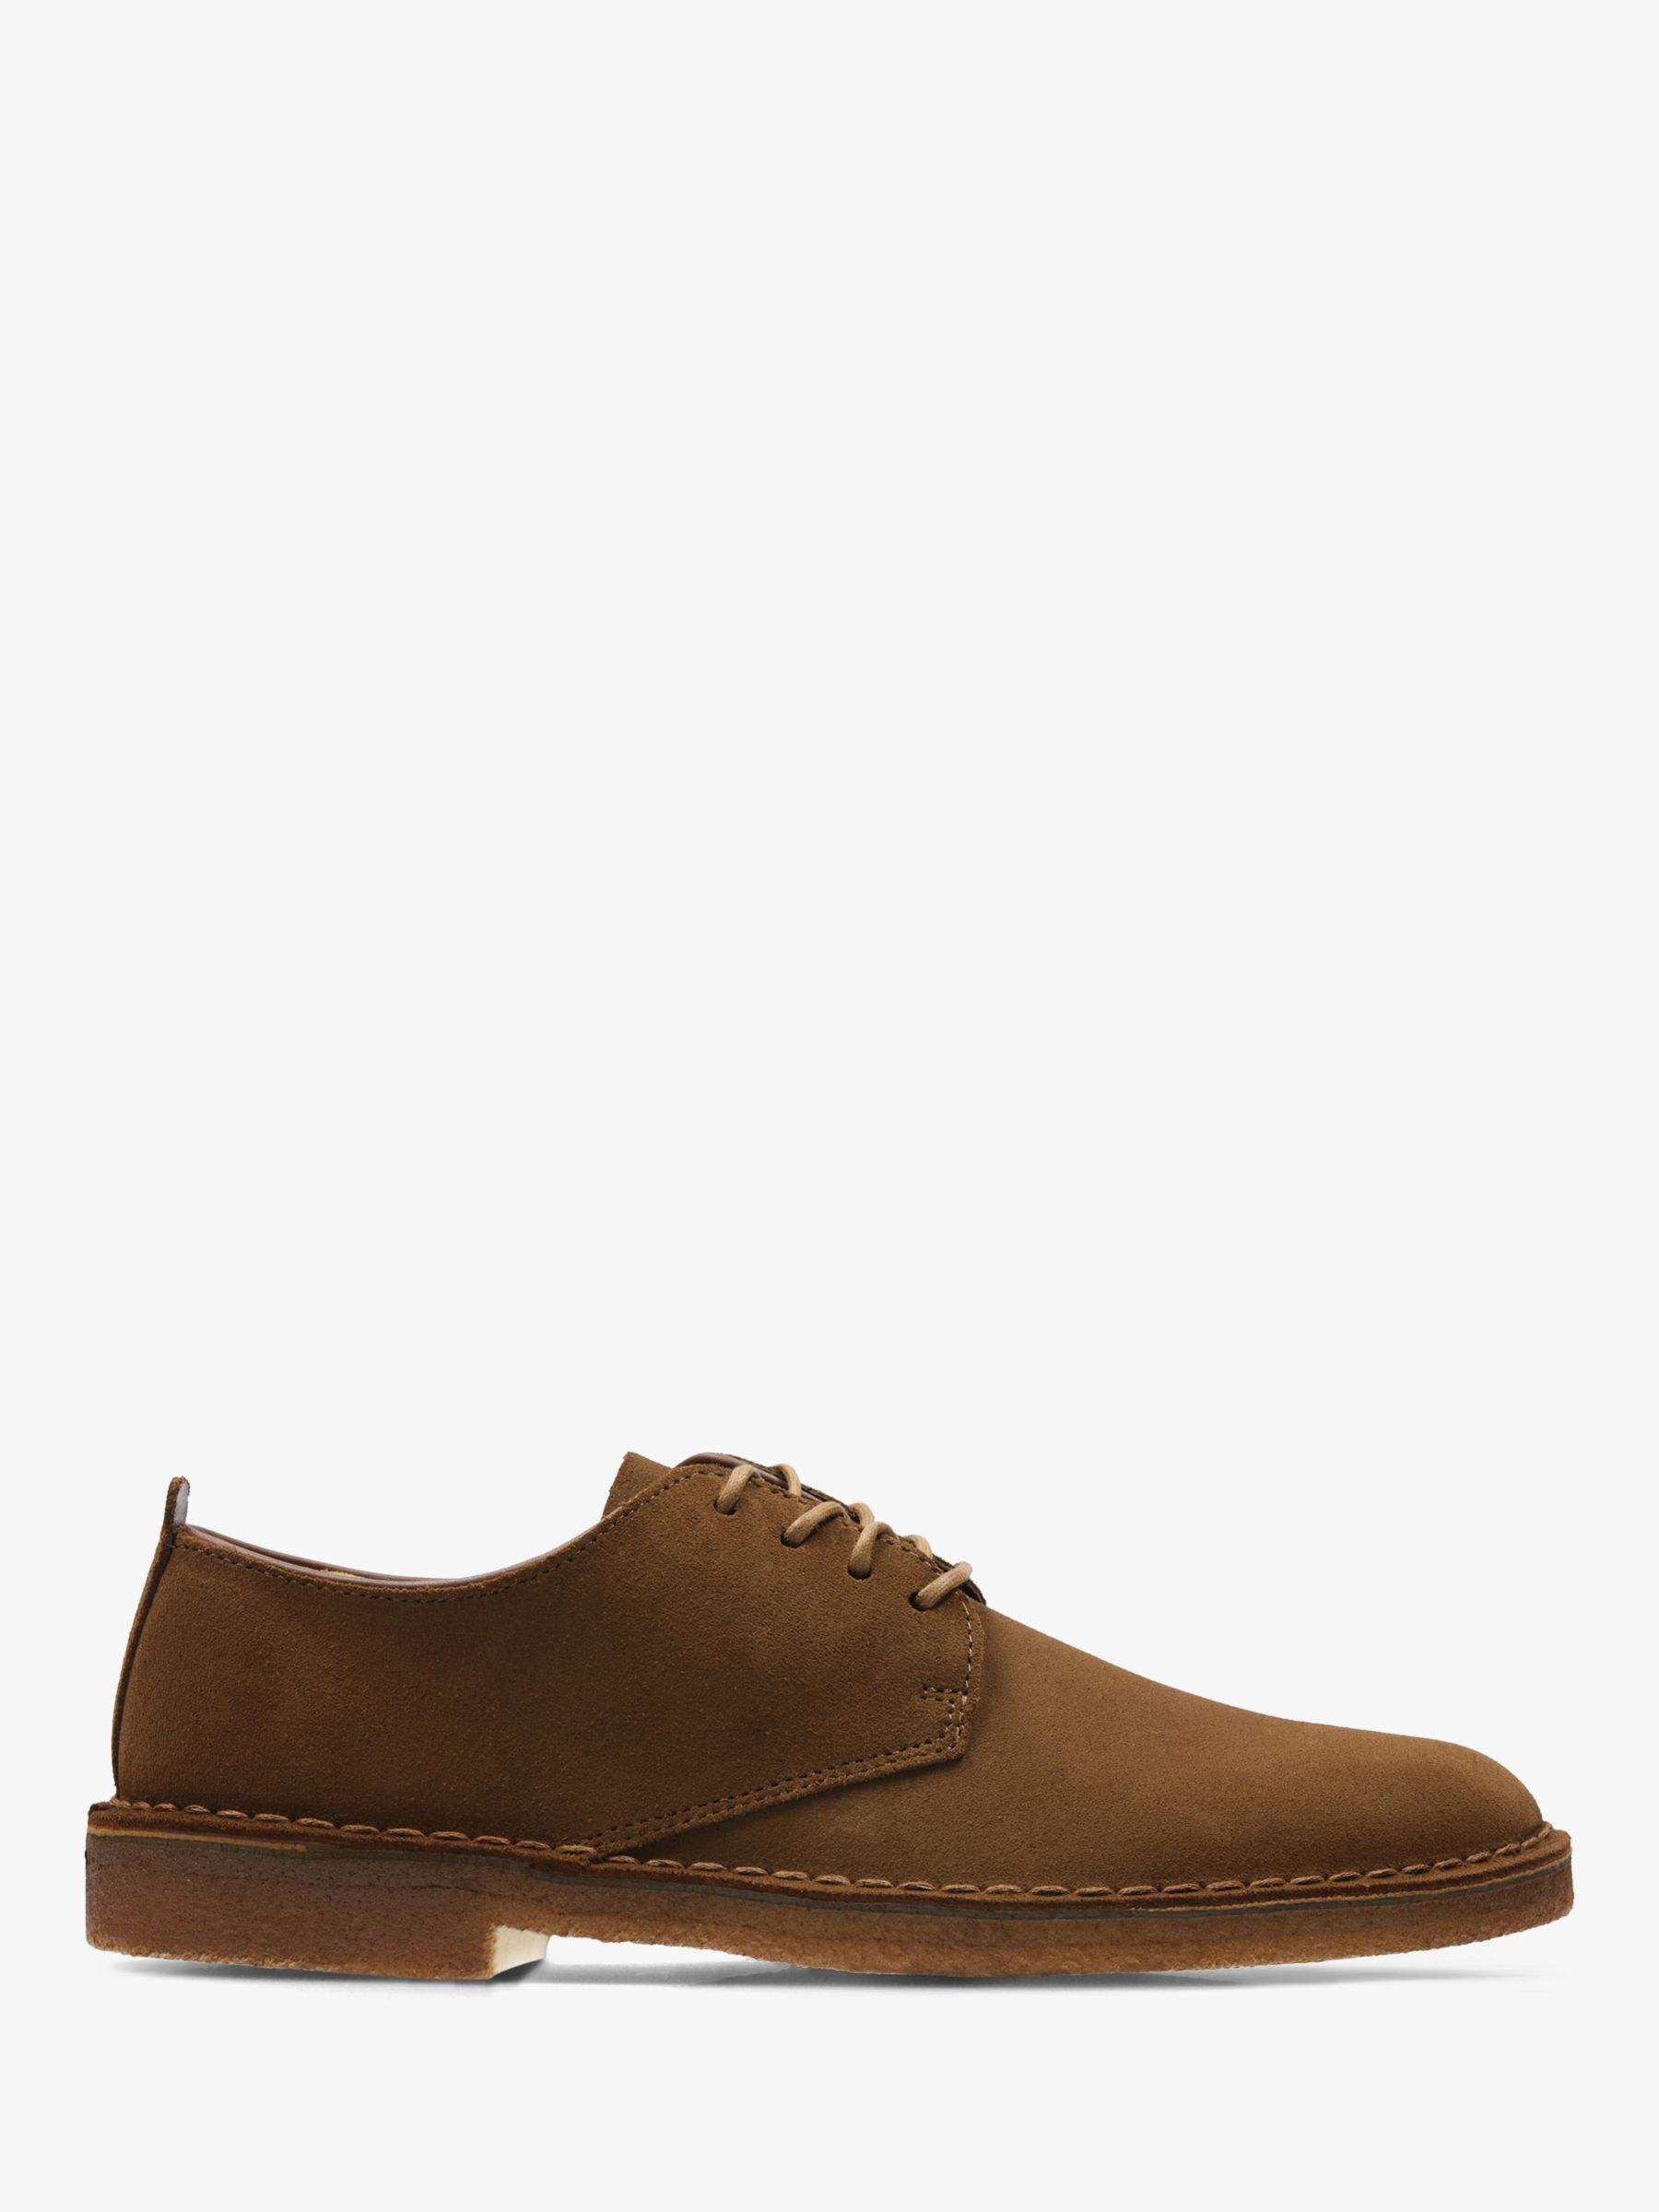 clarks shoes canberra